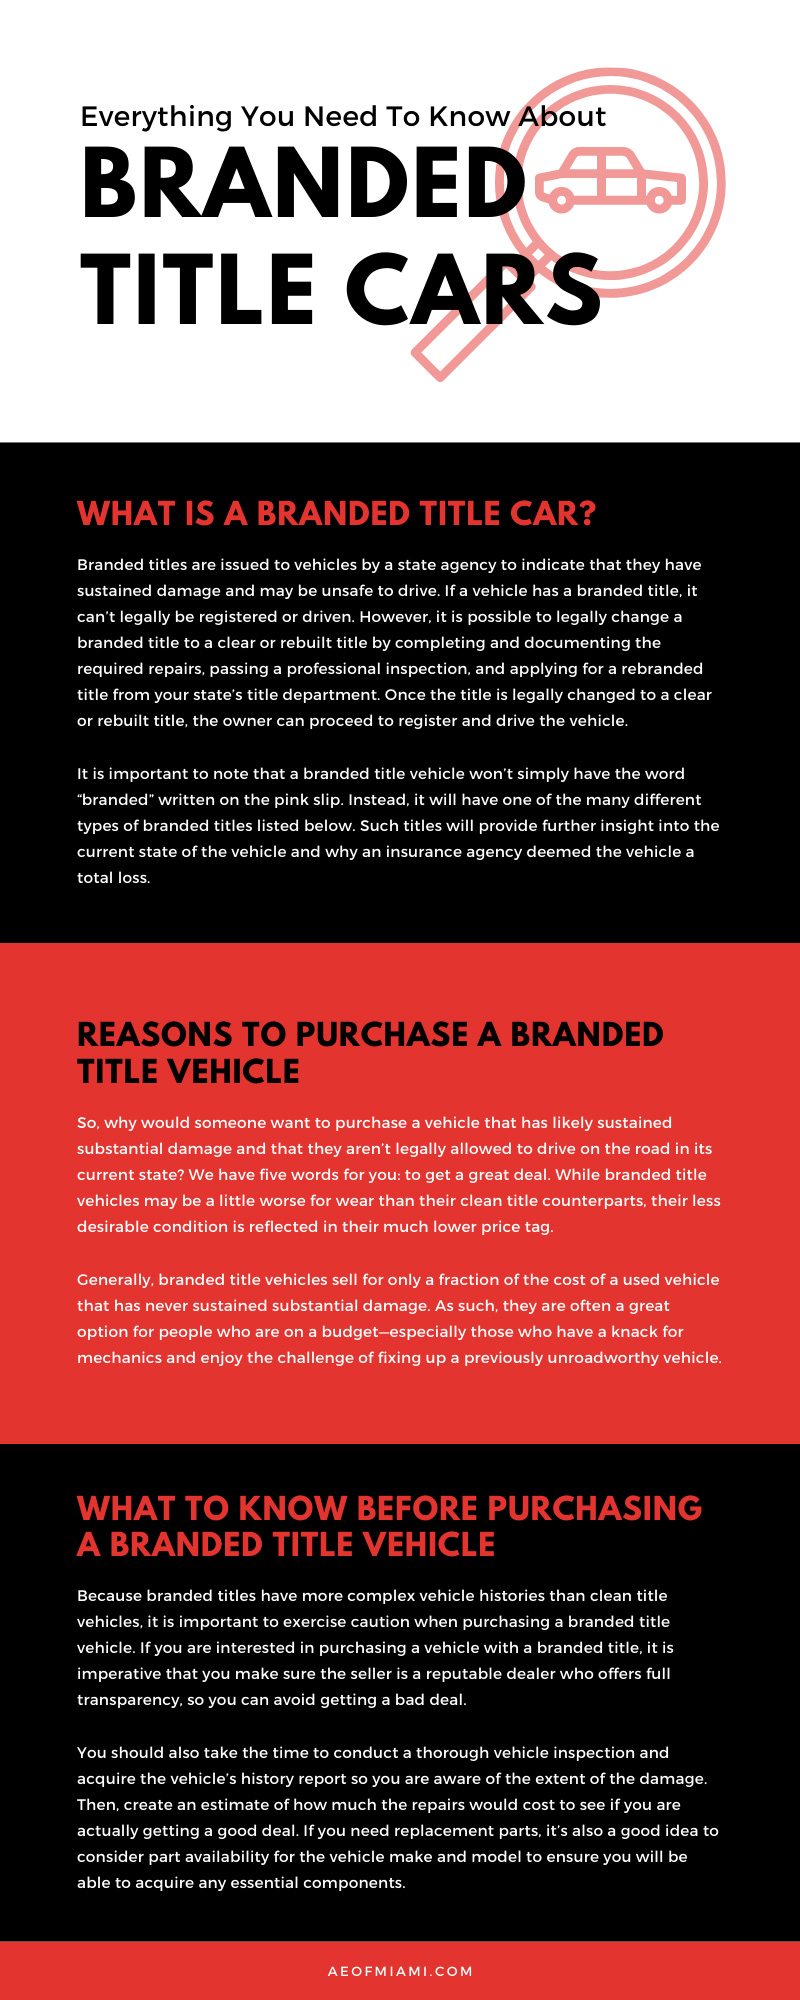 Everything You Need To Know About Branded Title Cars Infographic